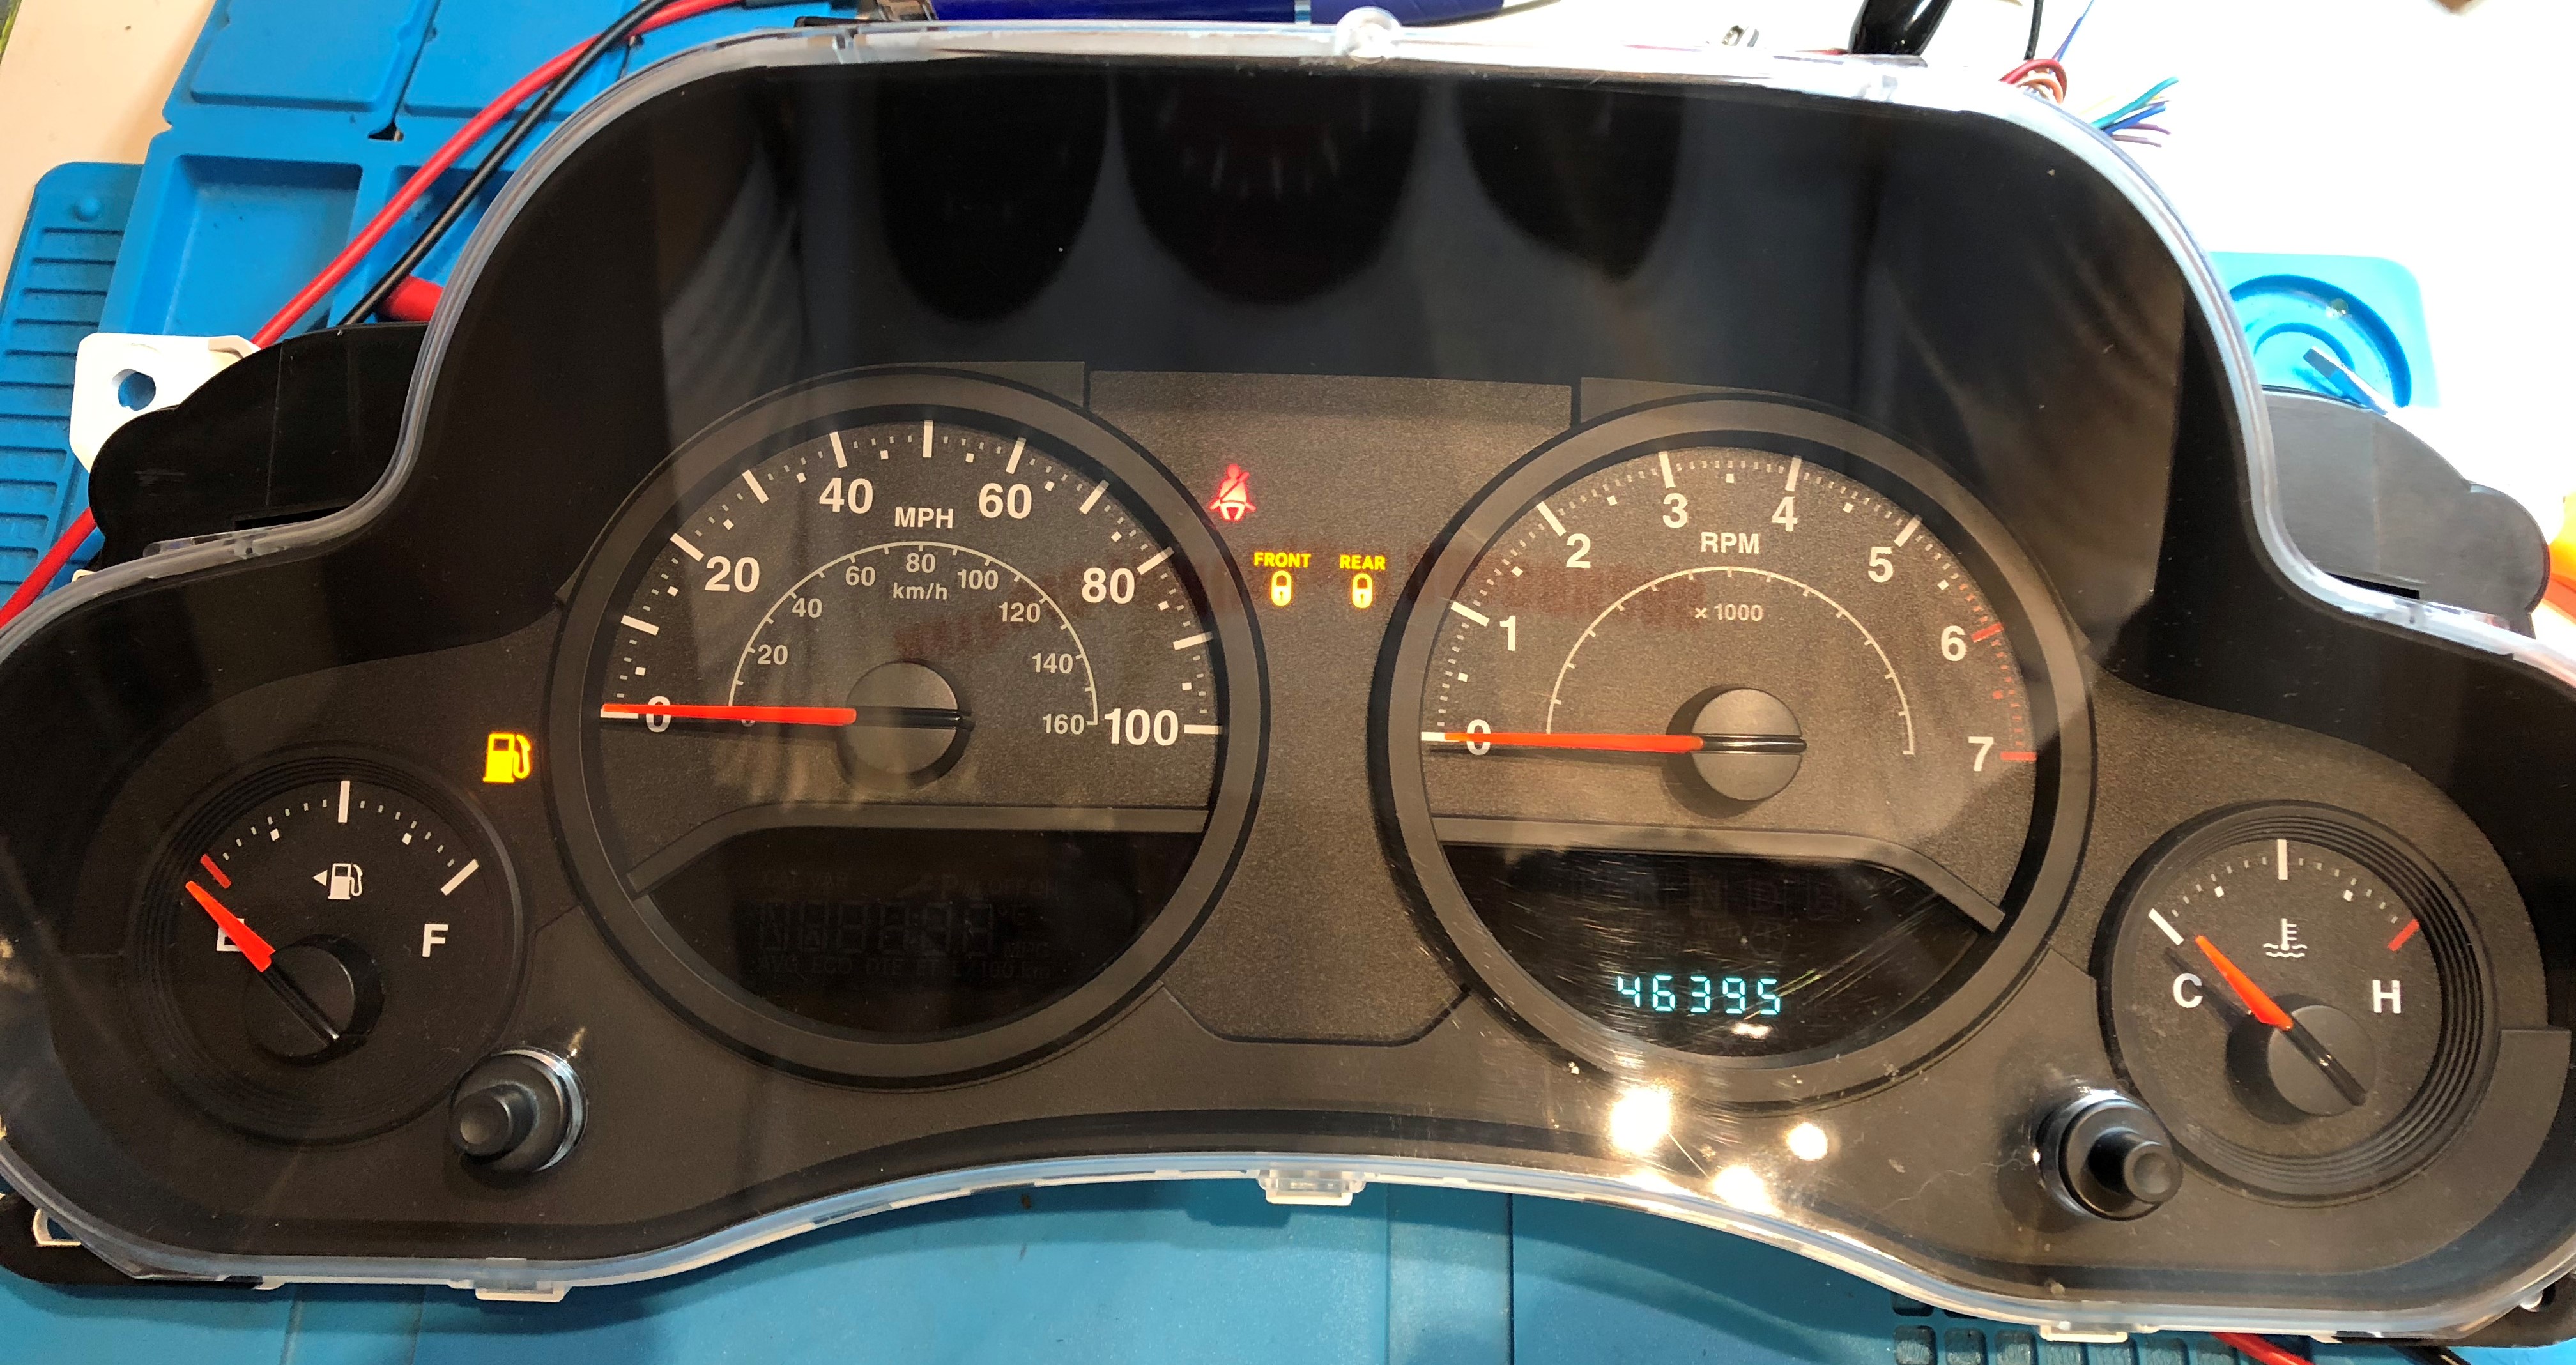 2008 JEEP WRANGLER USED DASHBOARD INSTRUMENT CLUSTER FOR SALE (MPH) -  DASHBOARD INSTRUMENT CLUSTER